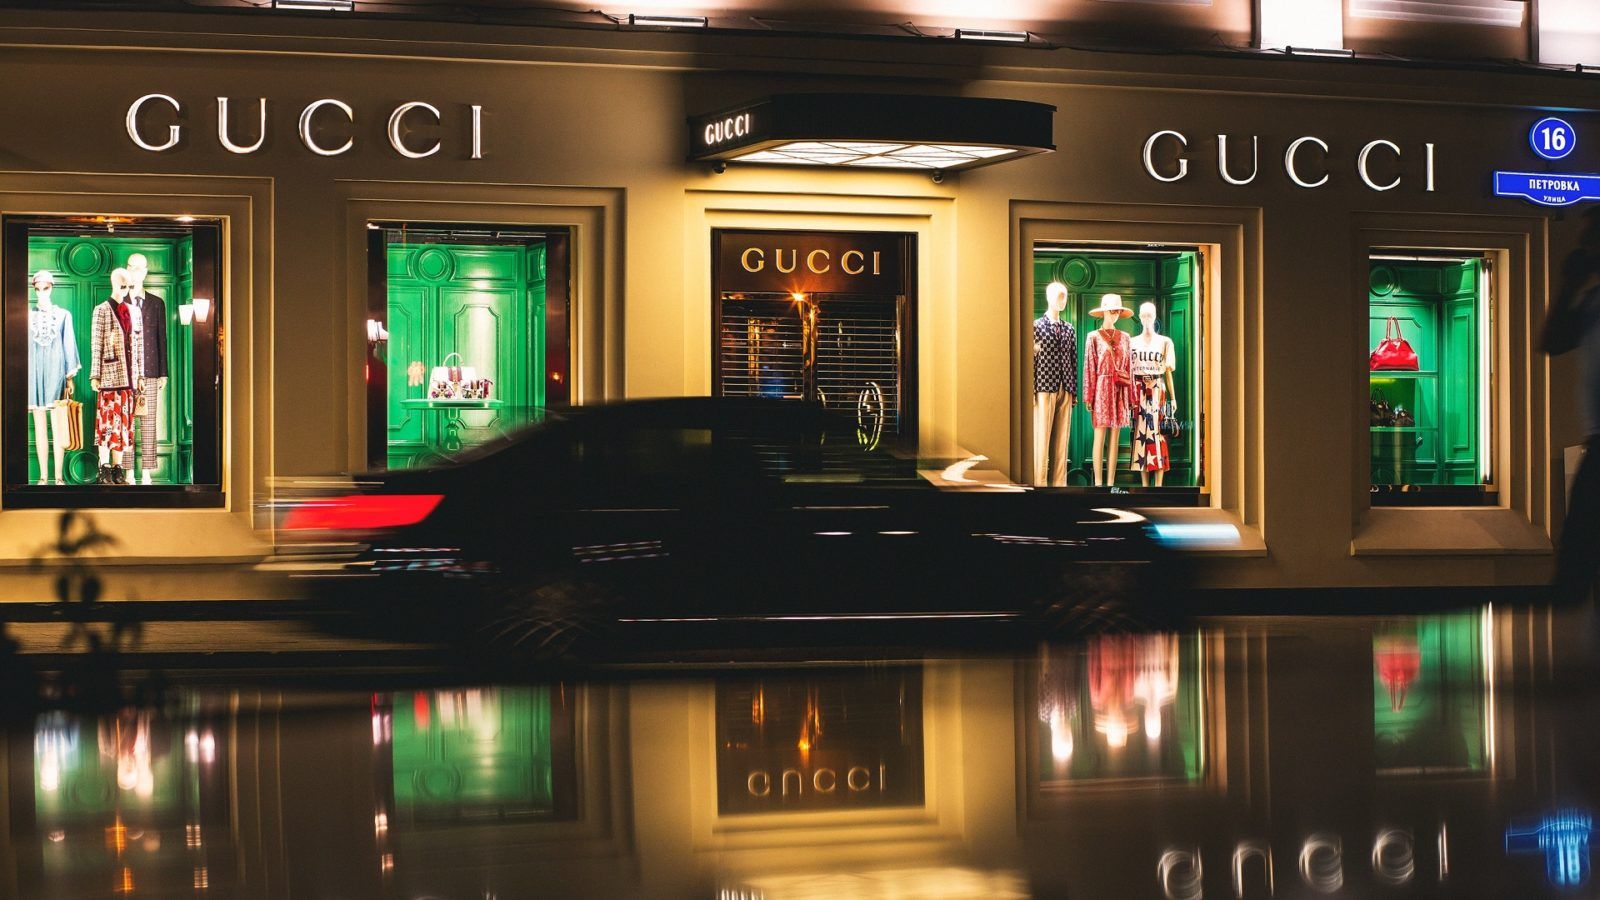 Luxury brand Gucci will now accept crypto payments at select stores